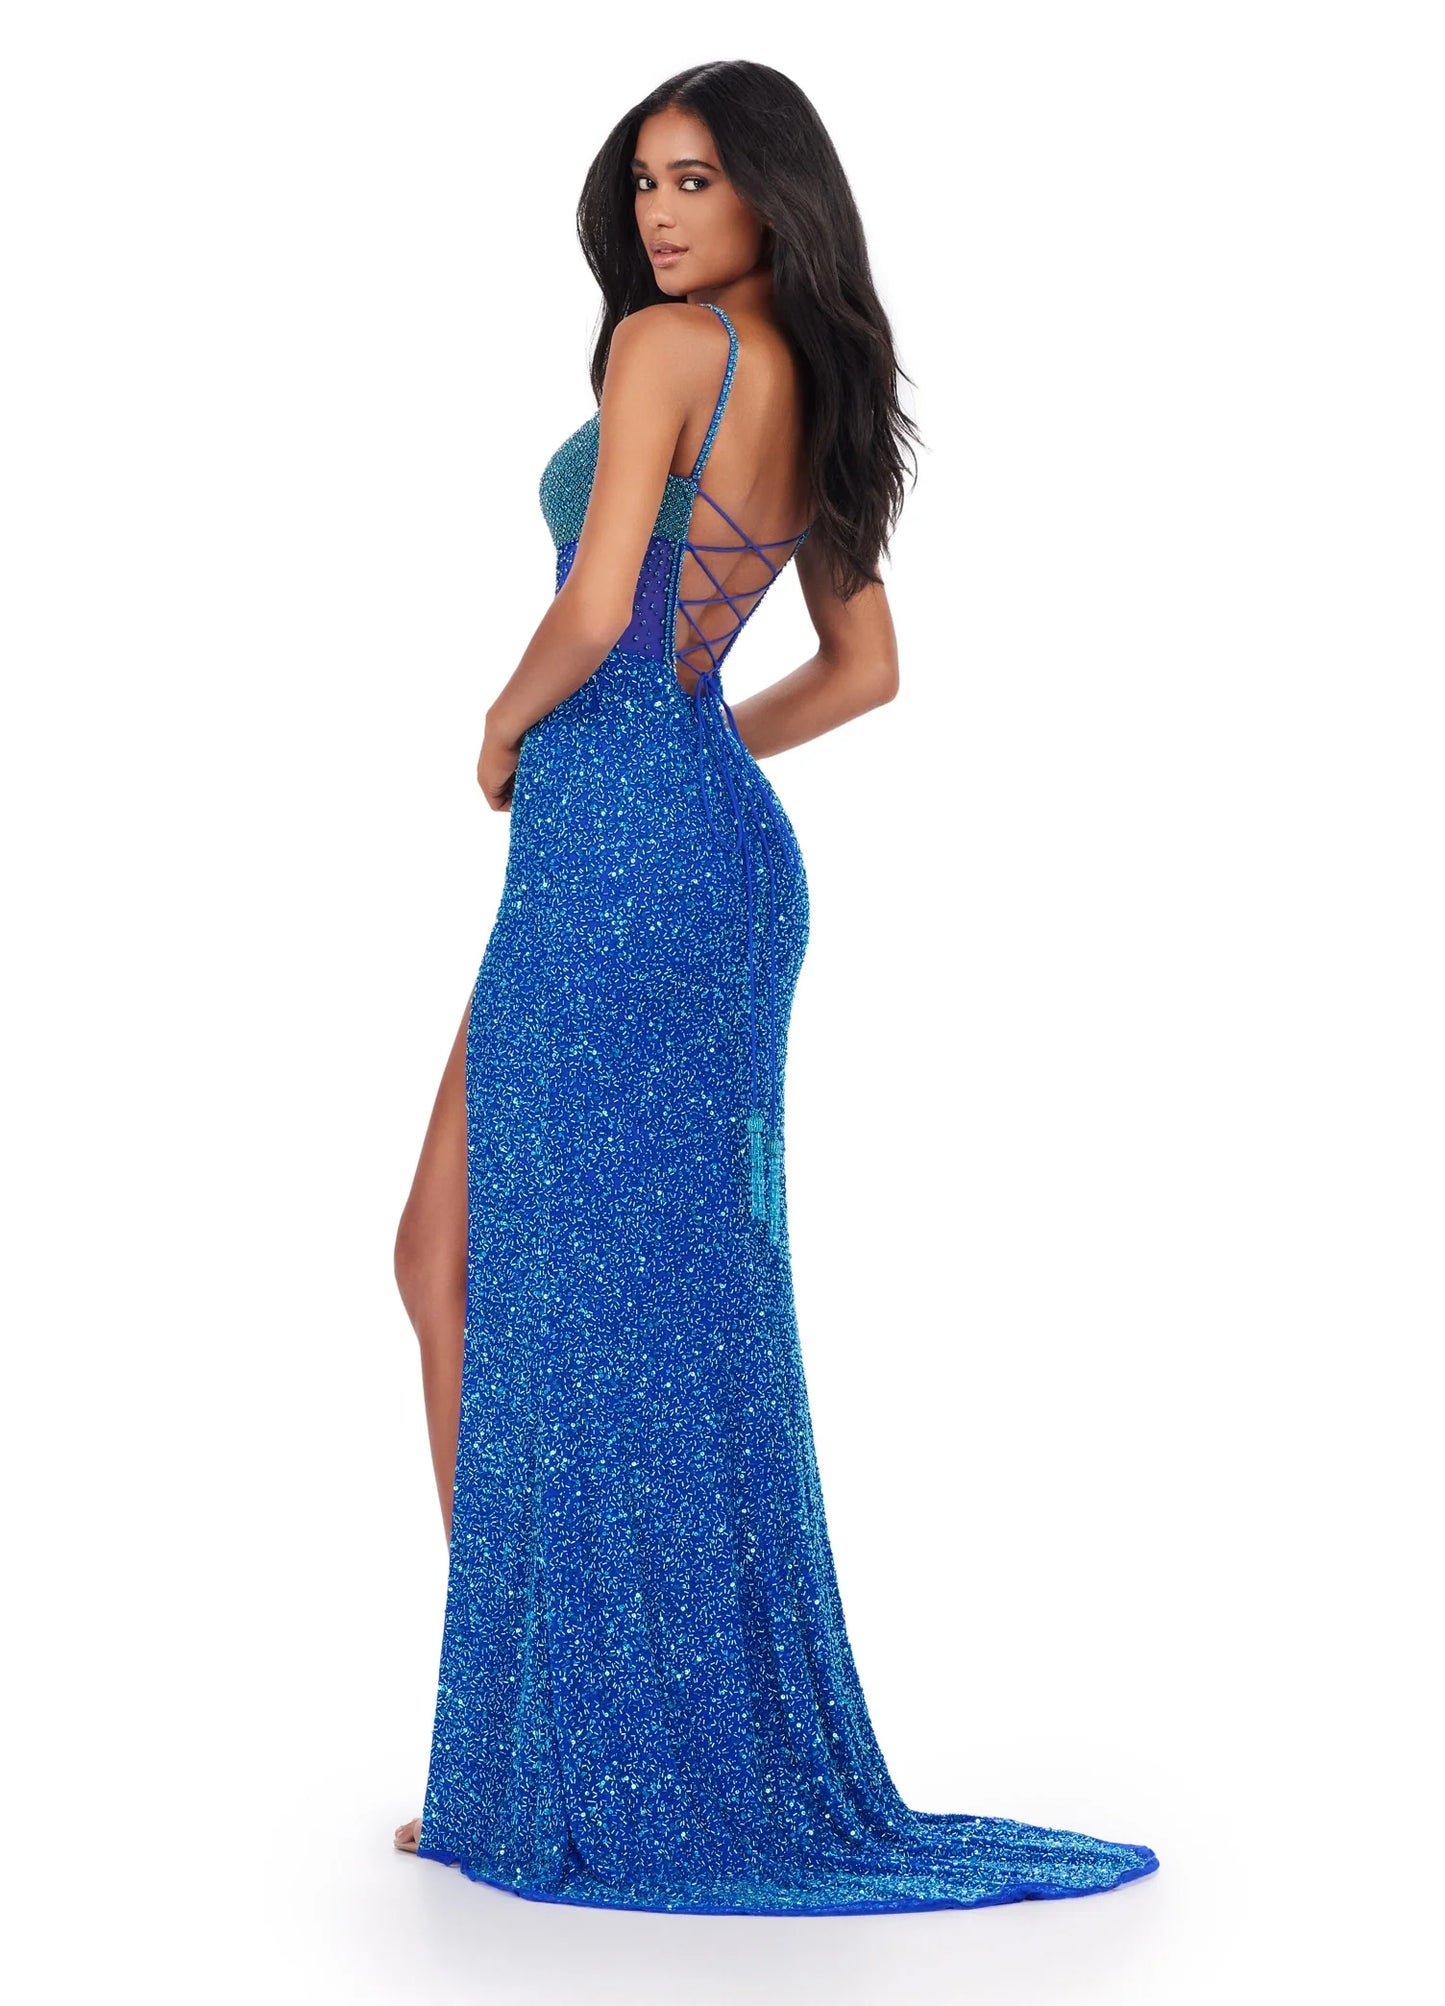 The Ashley Lauren 11448 is a stunning long gown for special occasions. It features a sequin-studded bodice with corset closure, side slit, and a backless design for a flattering silhouette. Perfect for proms, pageants, and formal events. All eyes will be on you in this fully beaded gown. The corset style bustier is embellished with crystals that are sure to dazzle. The left leg slit and lace up back complete the look. 